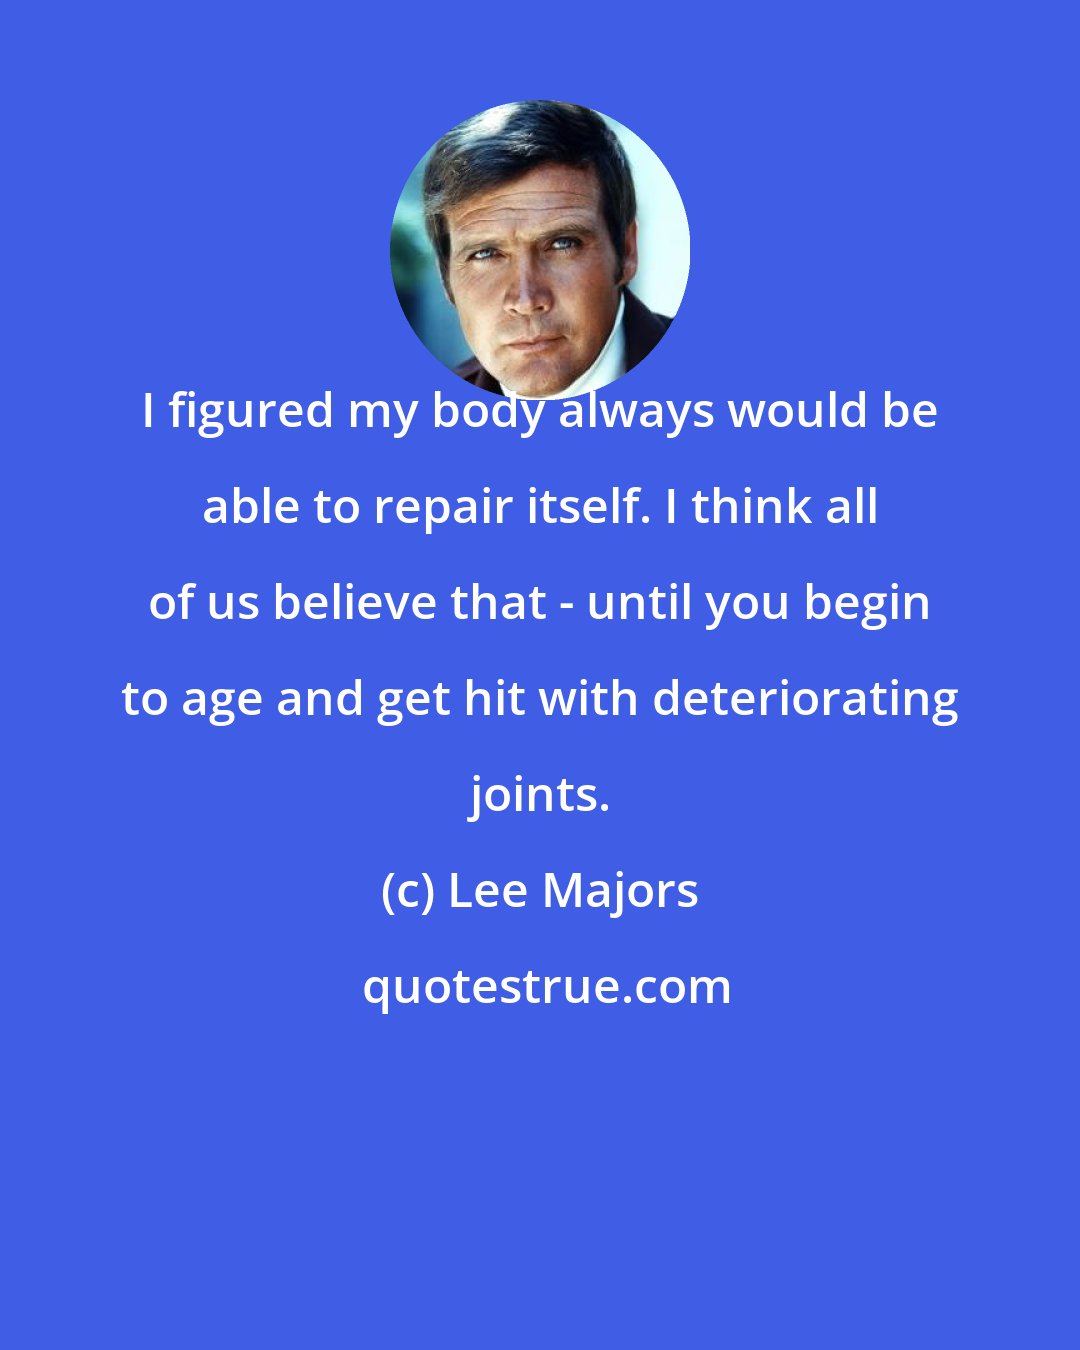 Lee Majors: I figured my body always would be able to repair itself. I think all of us believe that - until you begin to age and get hit with deteriorating joints.